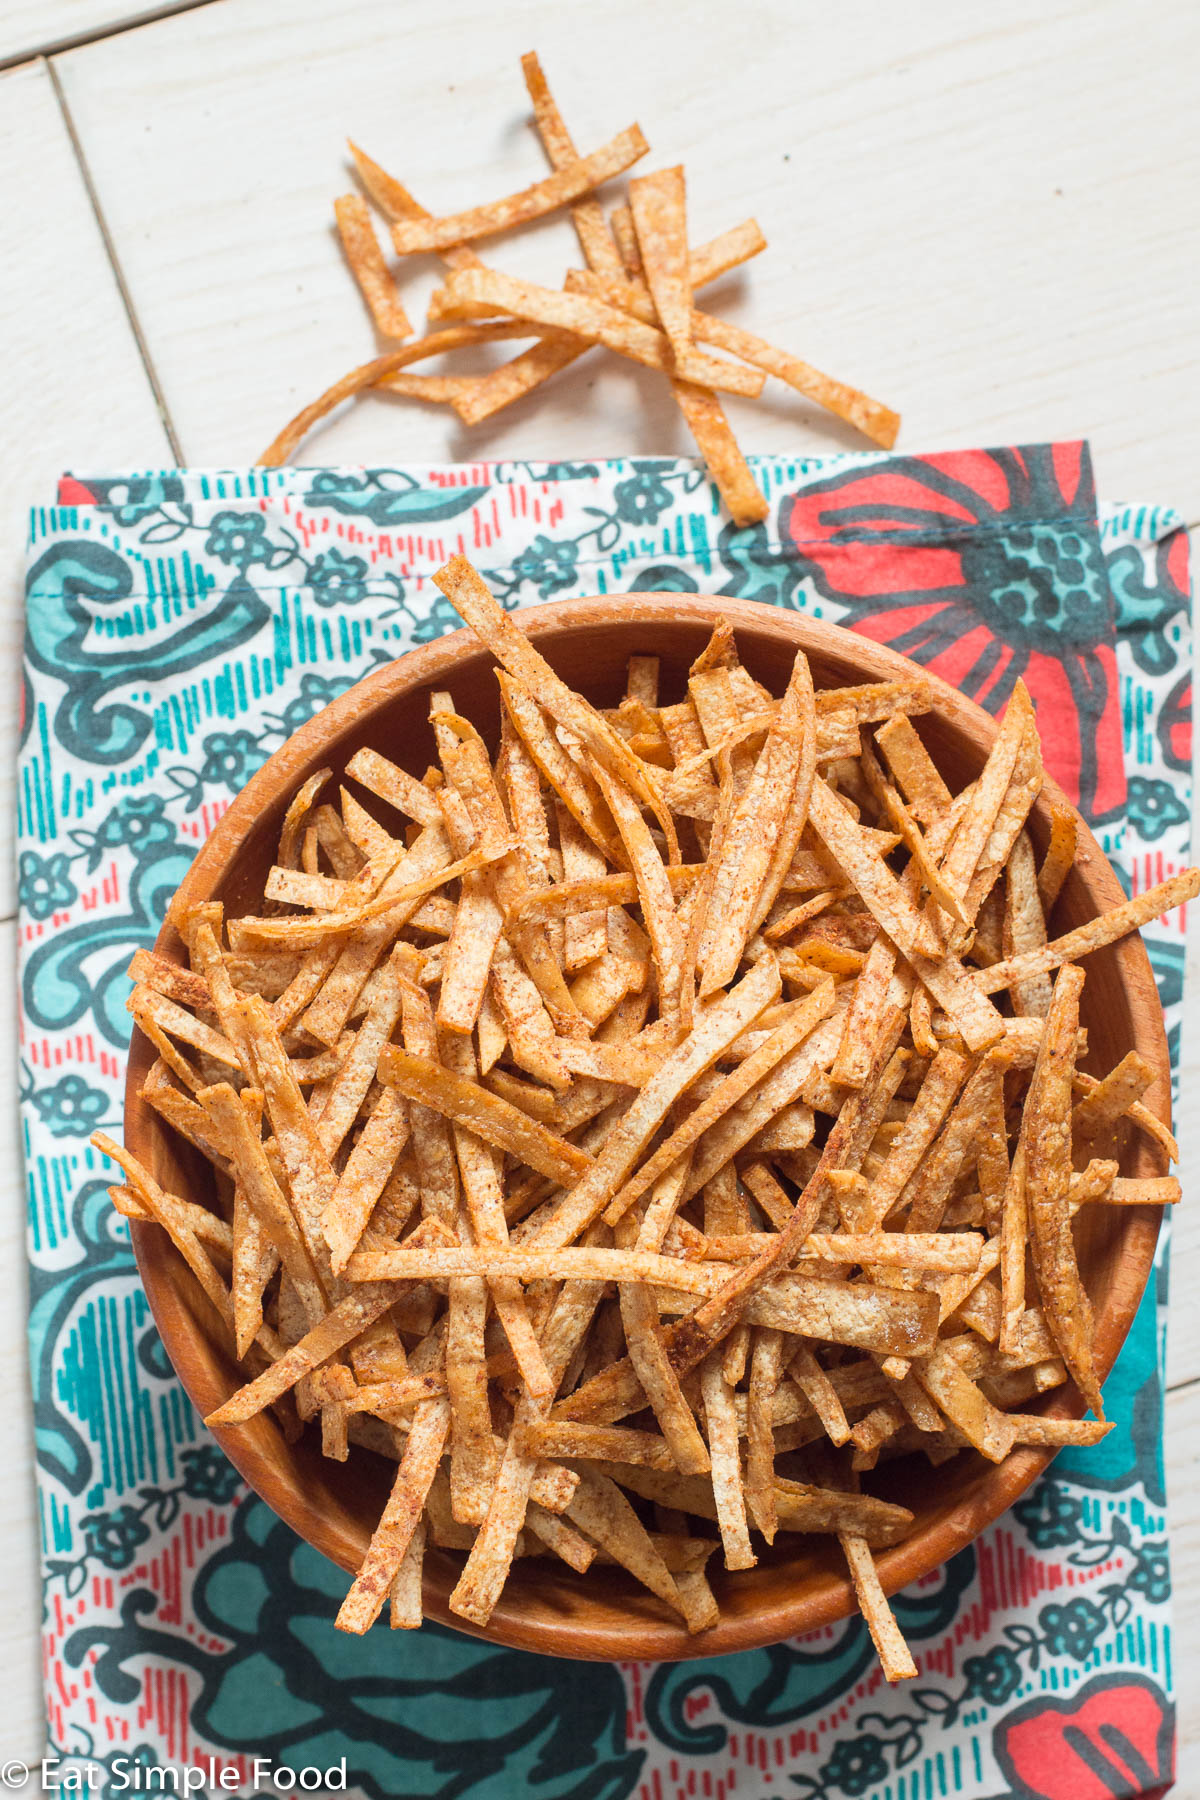 Crispy baked tortilla chips in a wood bowl over a colorful napkin. Top view.